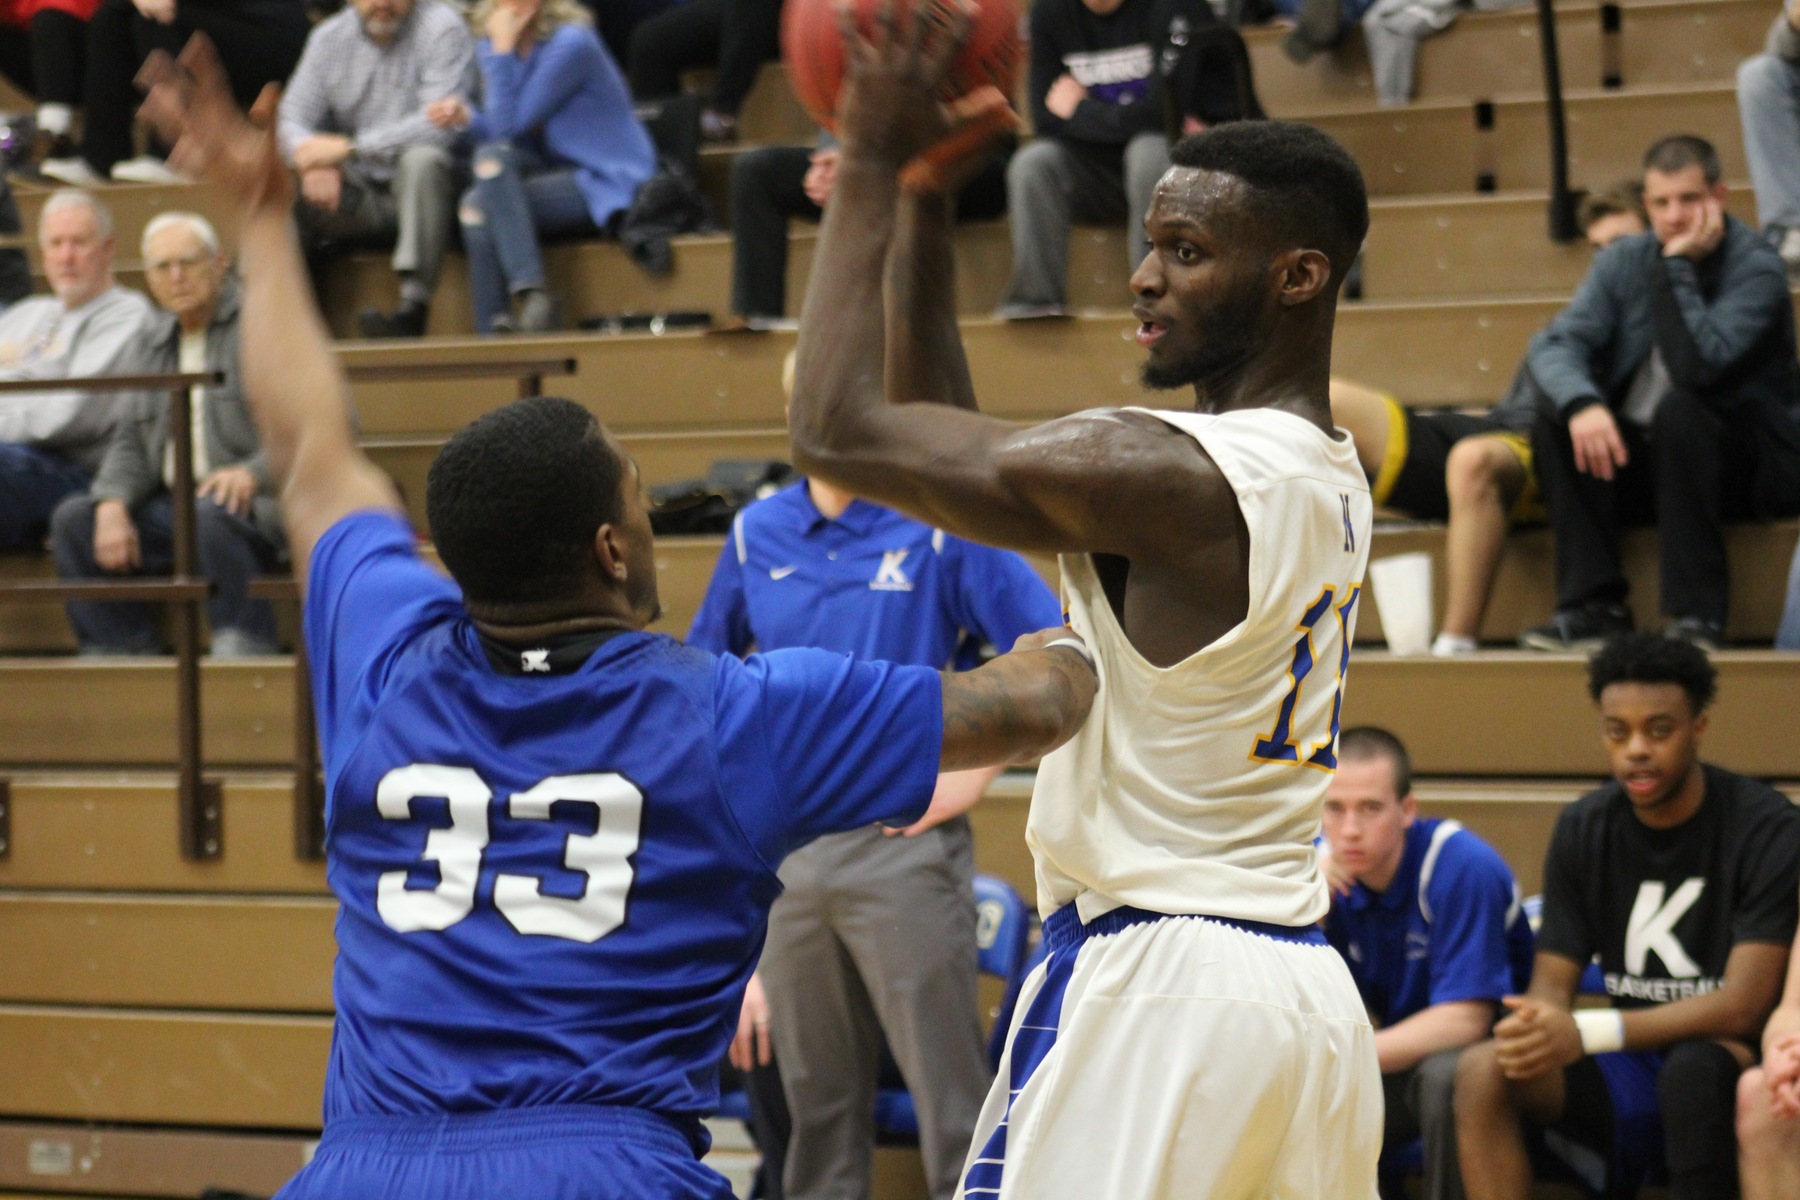 NIACC's Tim Trousell looks to make a move as he's defended by Kirkwood's Da'Rion King.